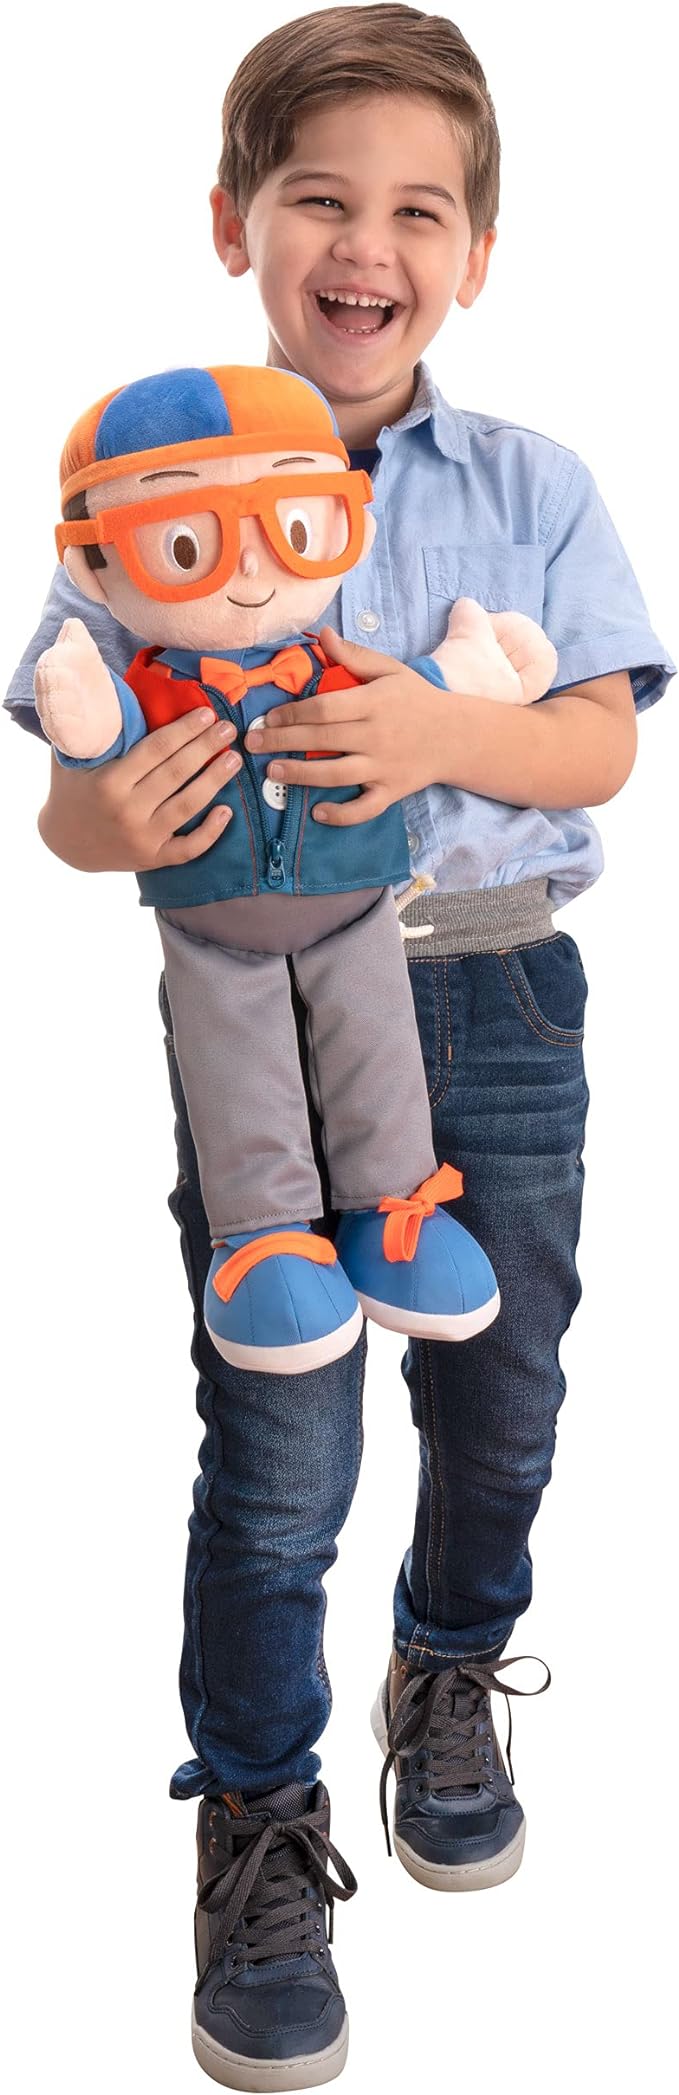 Blippi Feature Plush Get Ready & Play